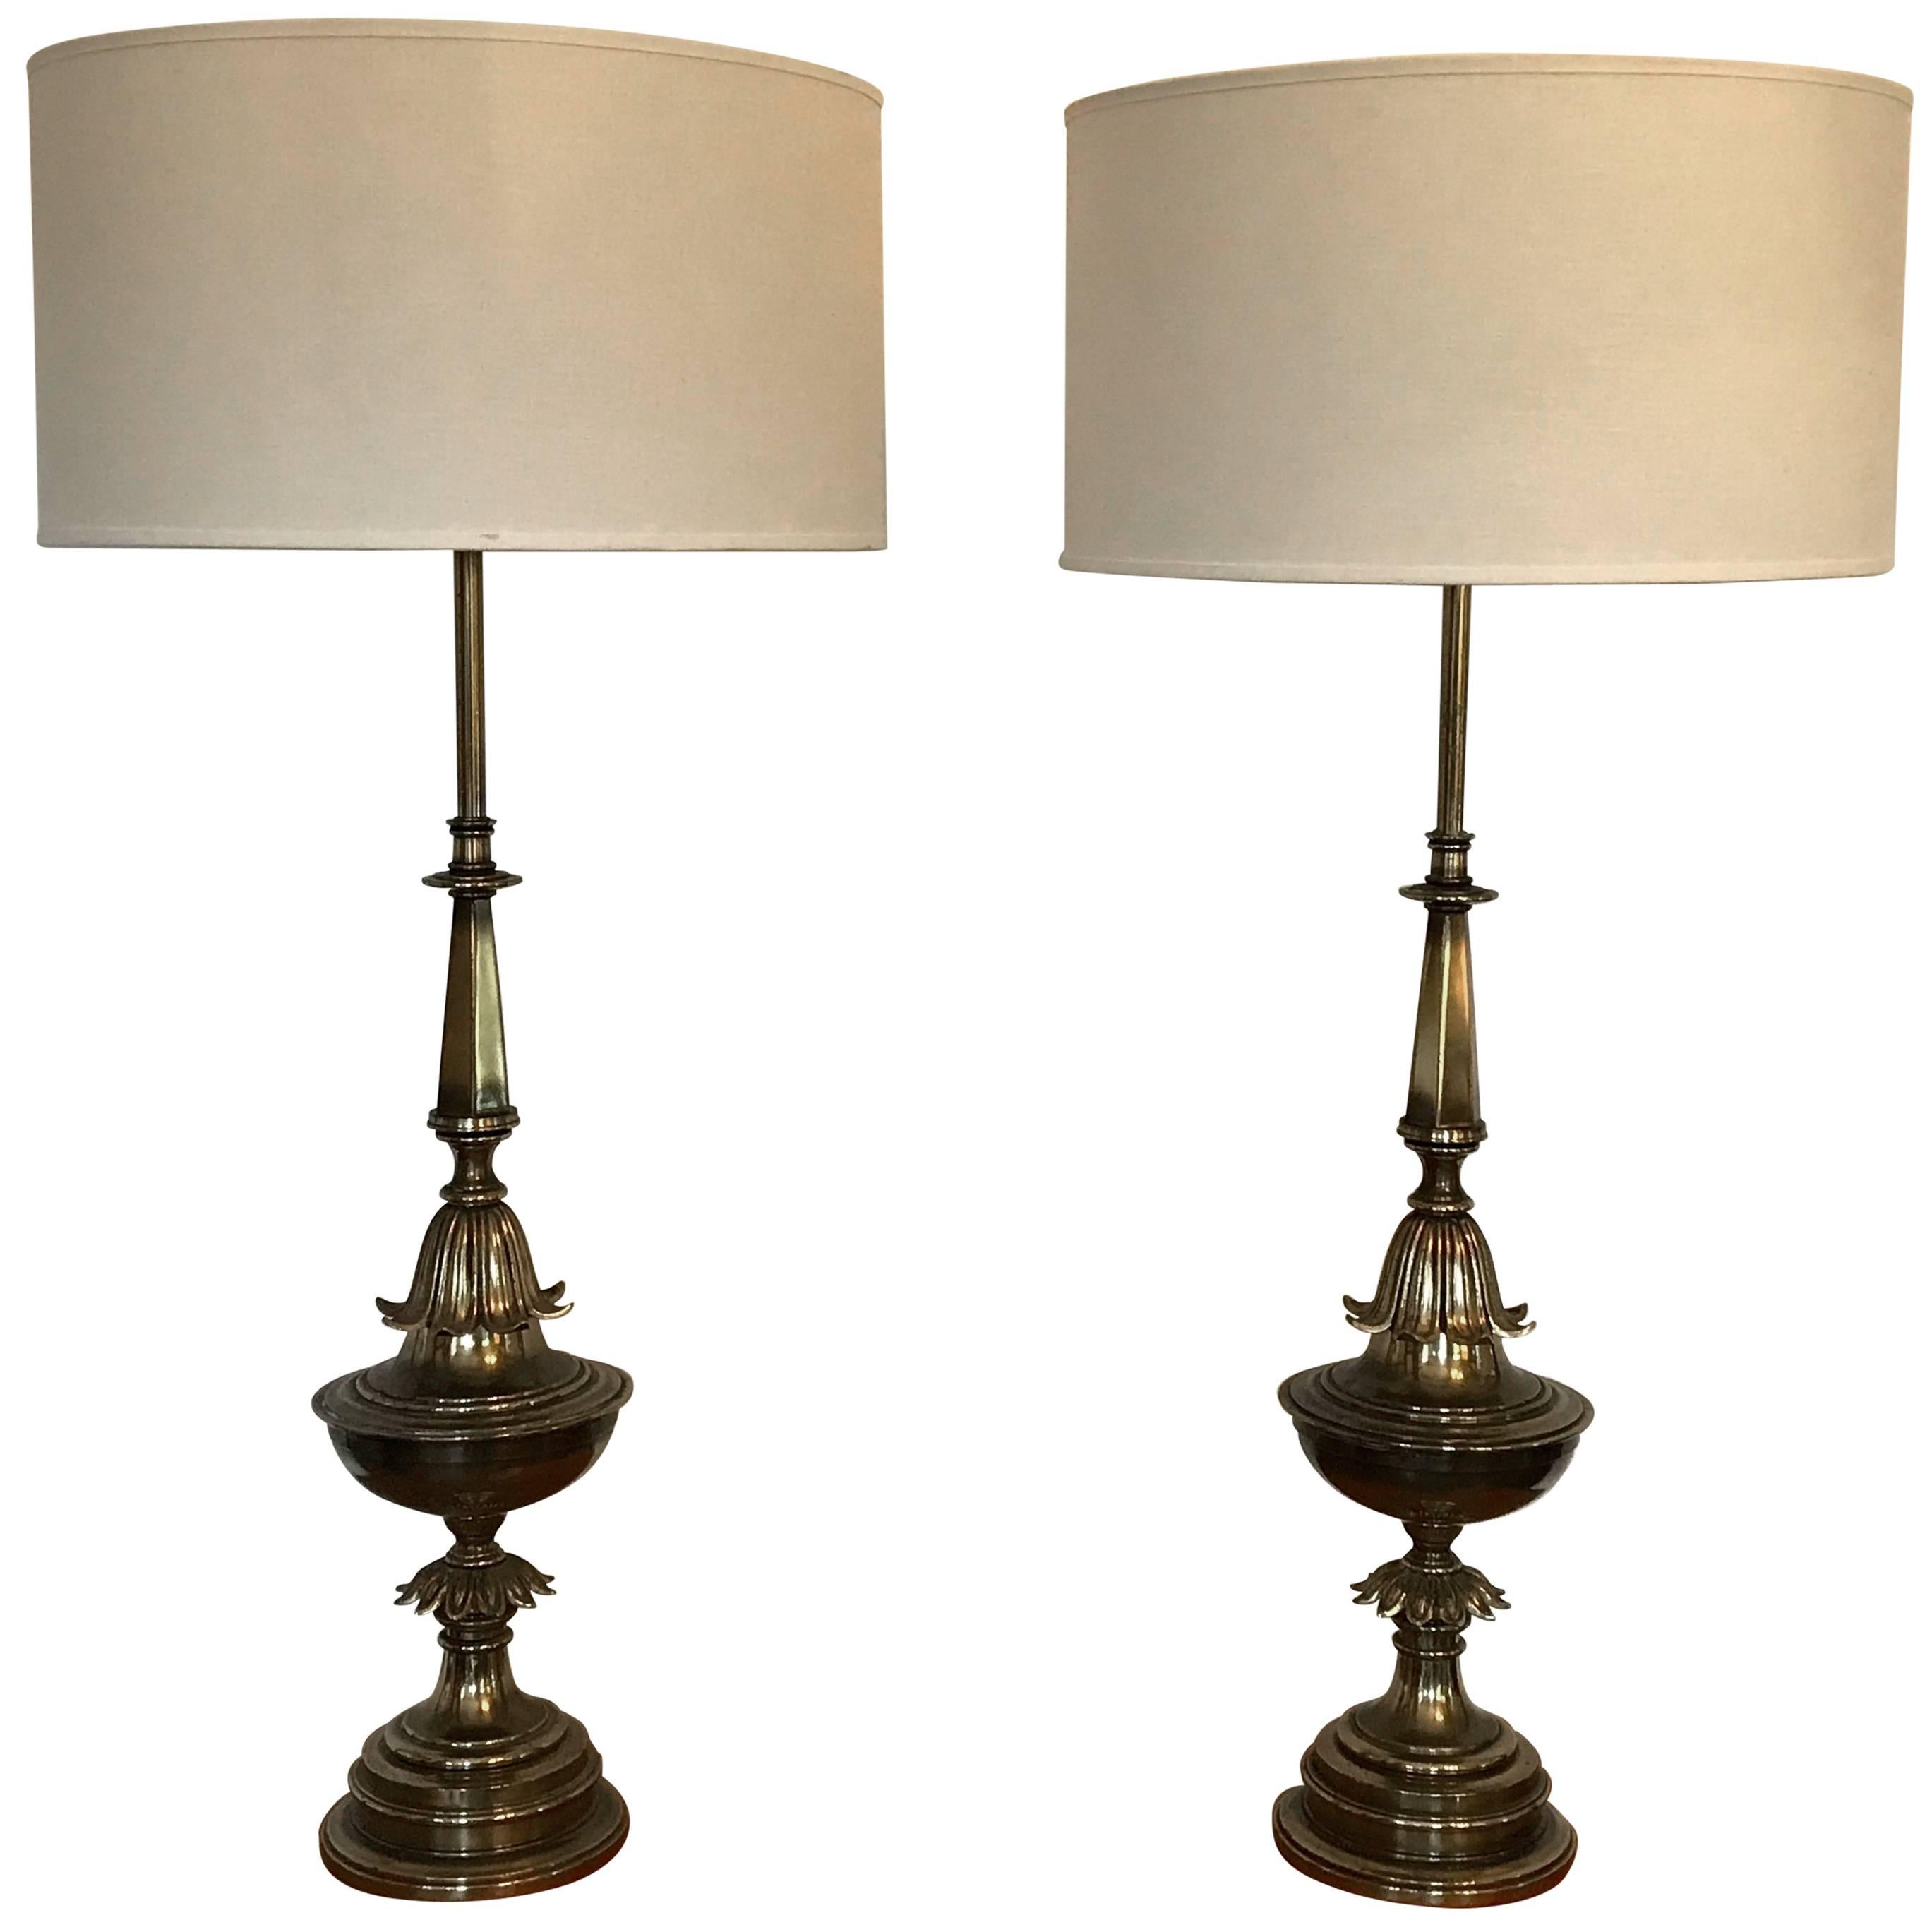 Pair of Hollywood Regency Style Brass Table Lamps, Large Scale, 1940's